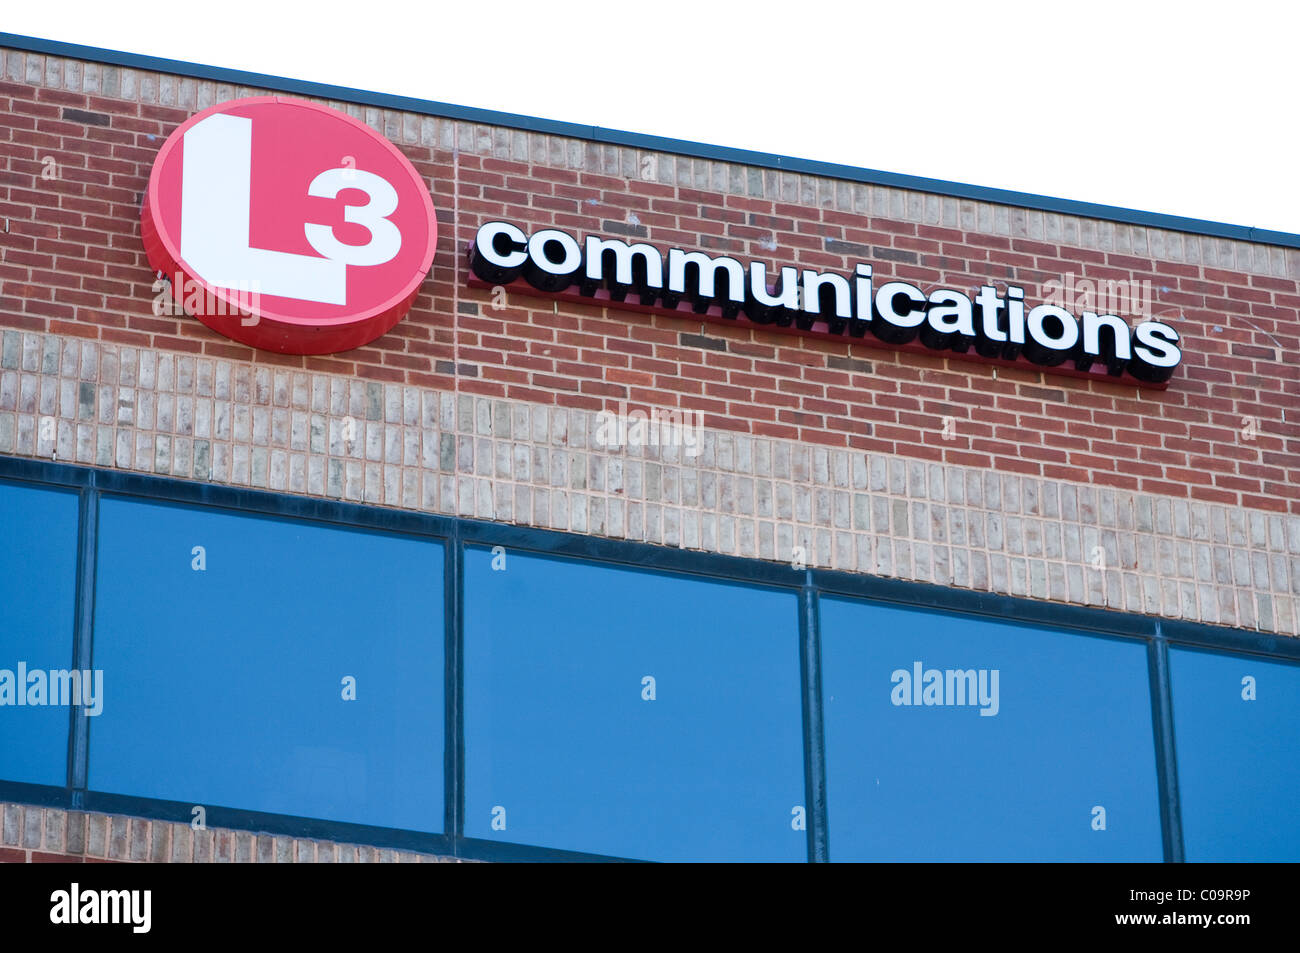 A L3 Communications office building. Stock Photo